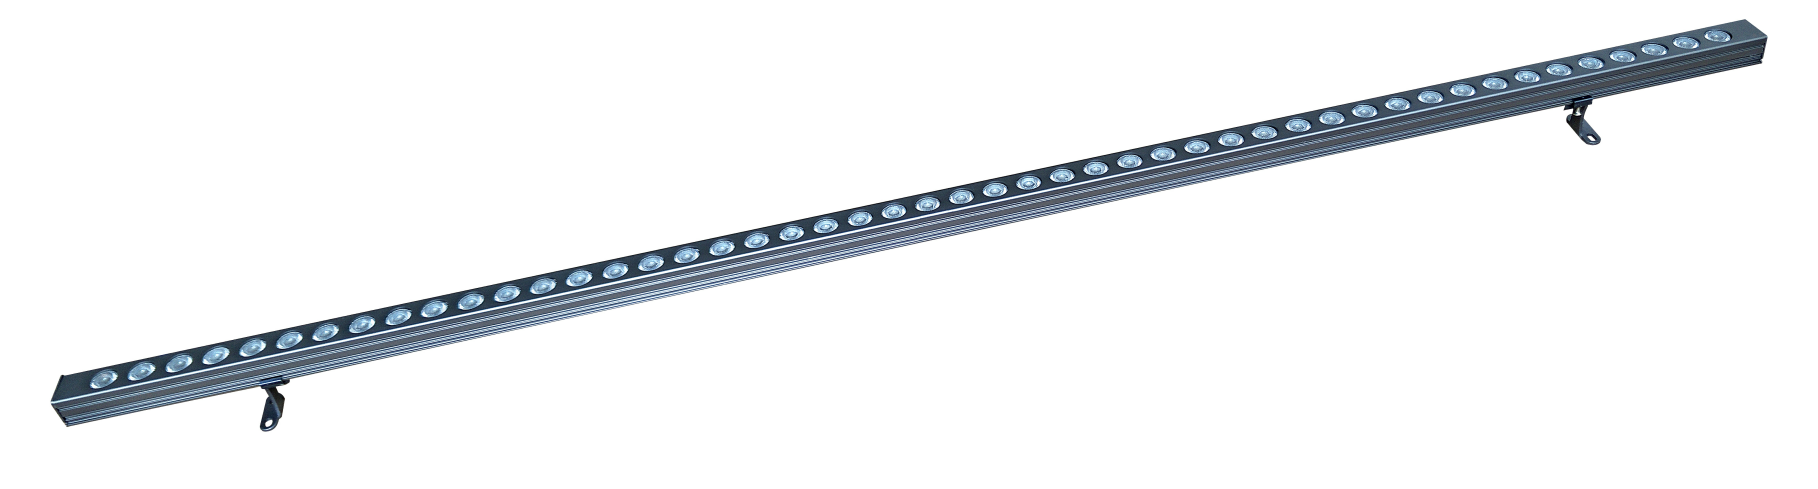 LED wall washer light HP001